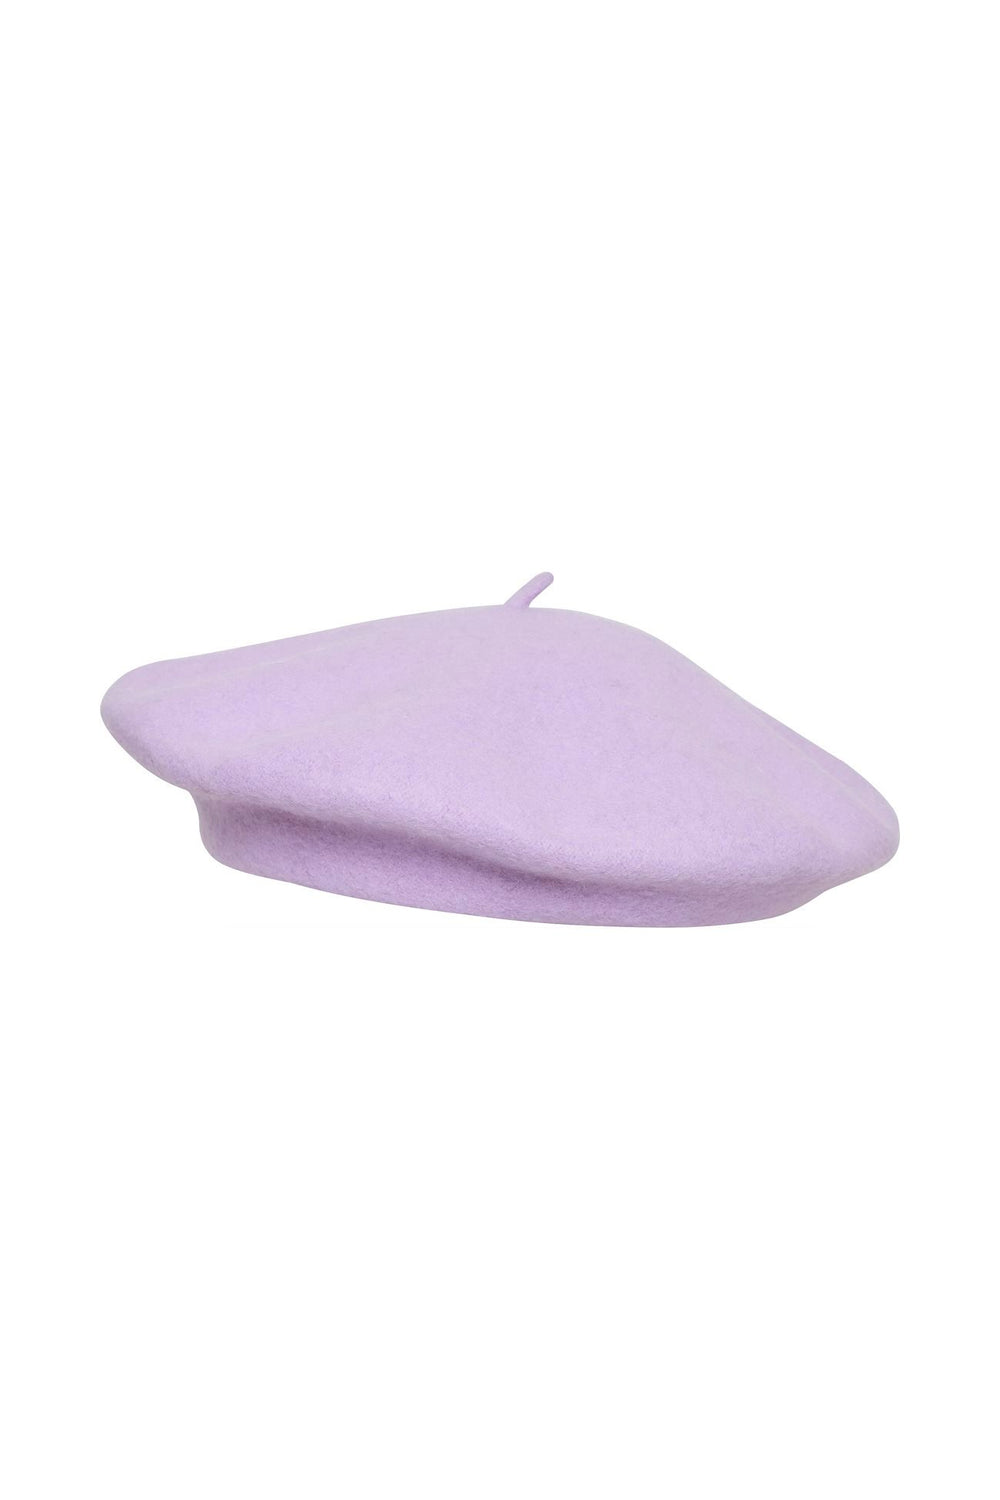 IAALICE Lavender Herb Lilac Hat